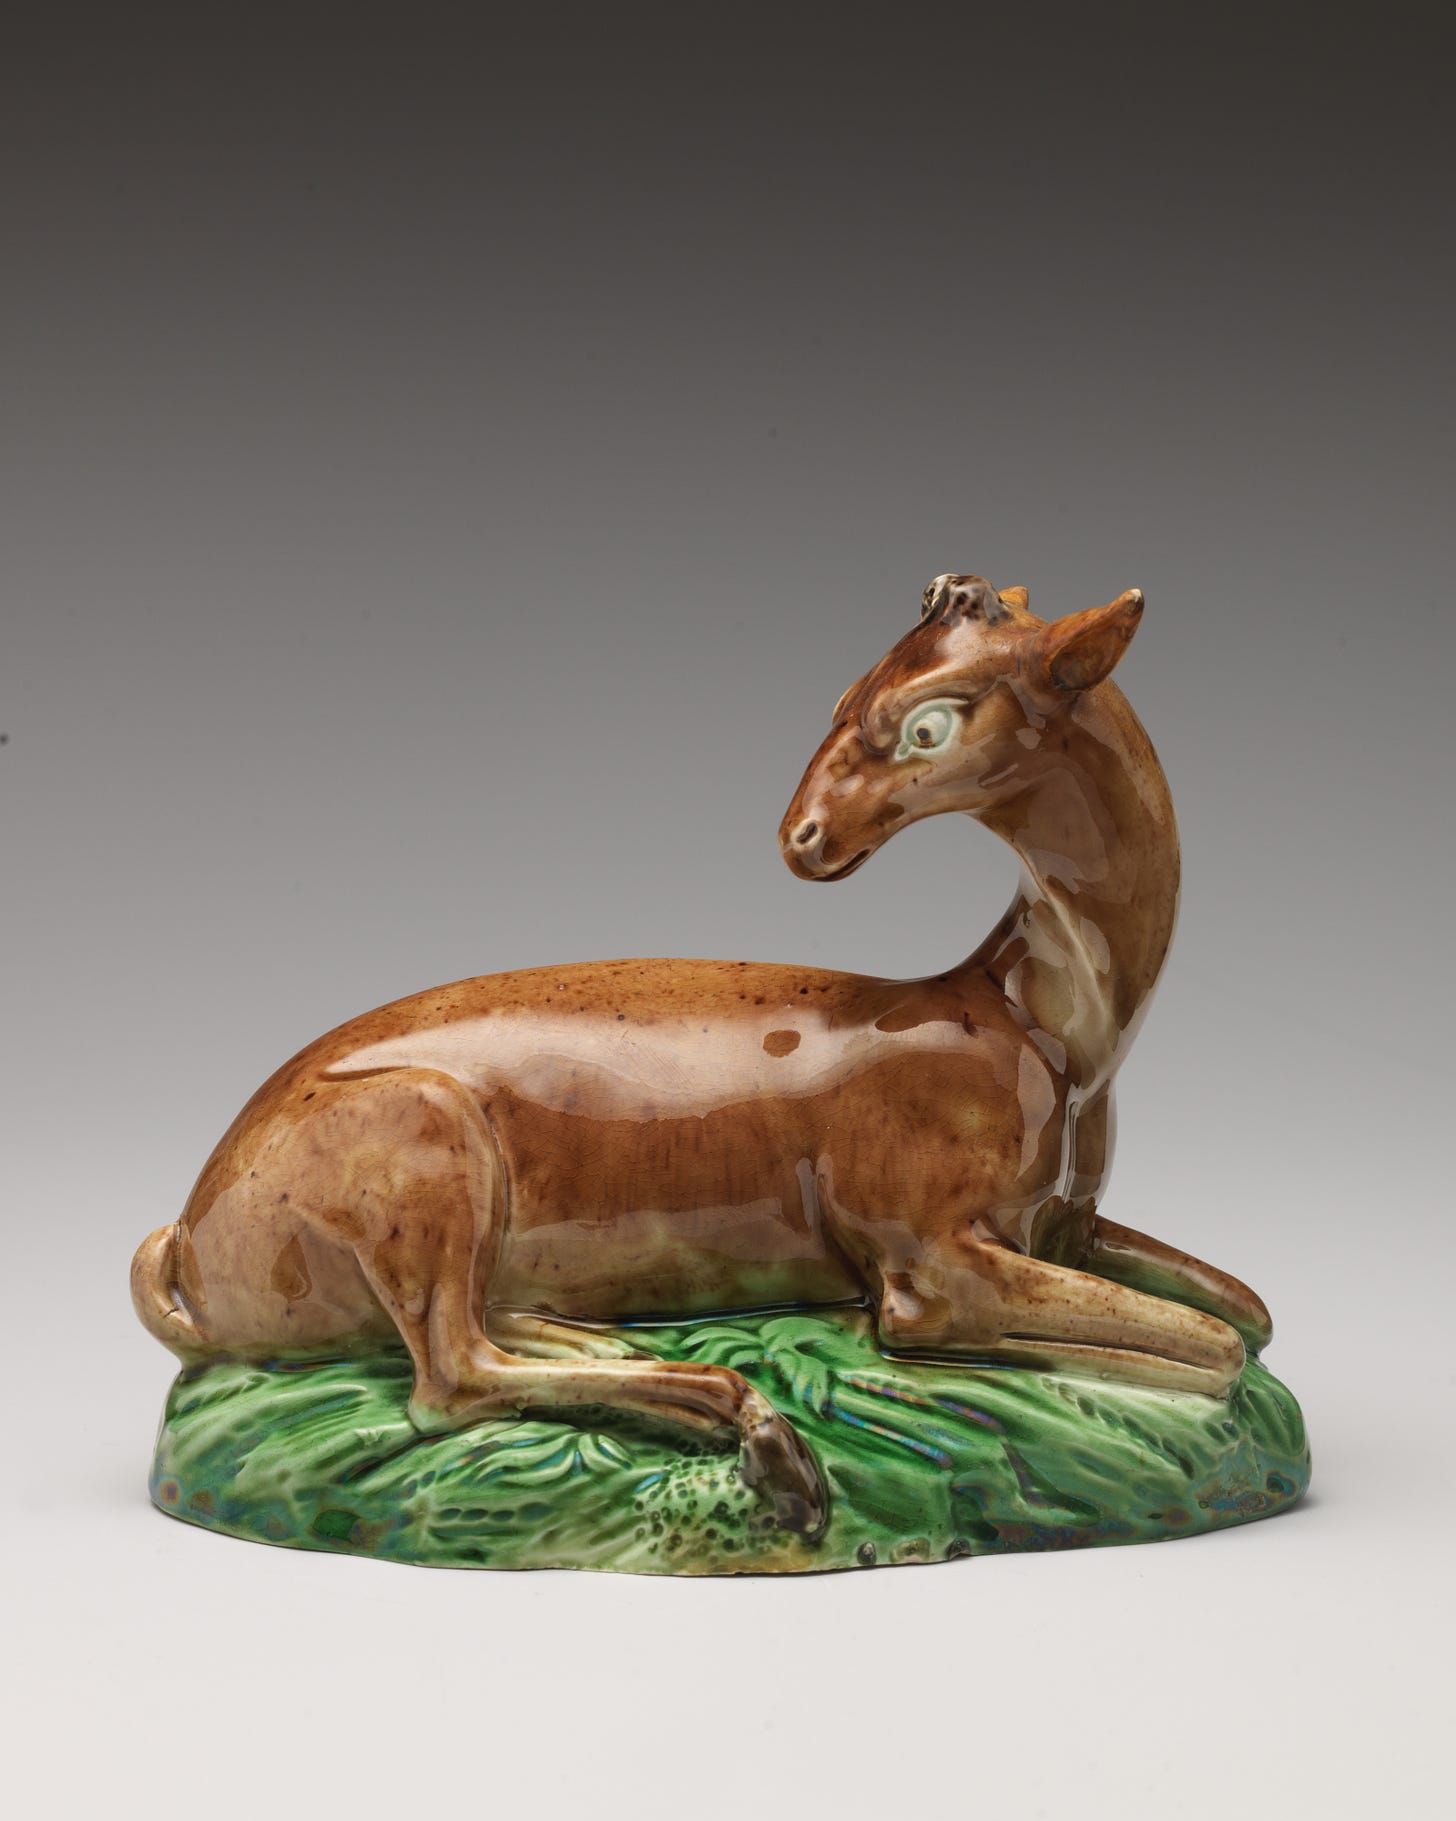 Ceramic brown doe with large eye, arching neck towards back, sits atop green ceramic grass.